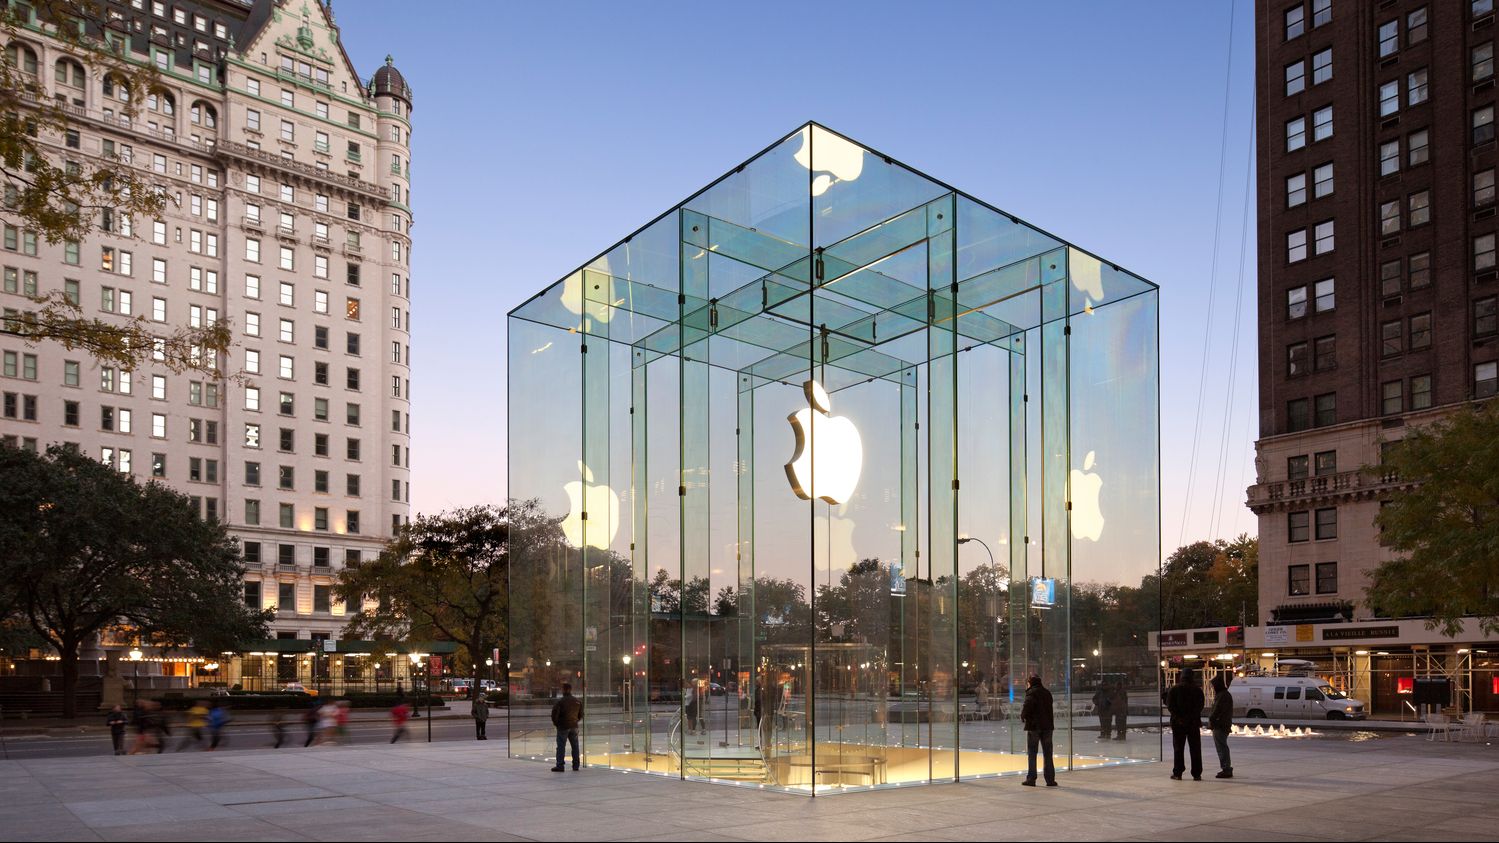 ✓ Apple Store, Fith Avenue - Data, Photos & Plans - WikiArquitectura